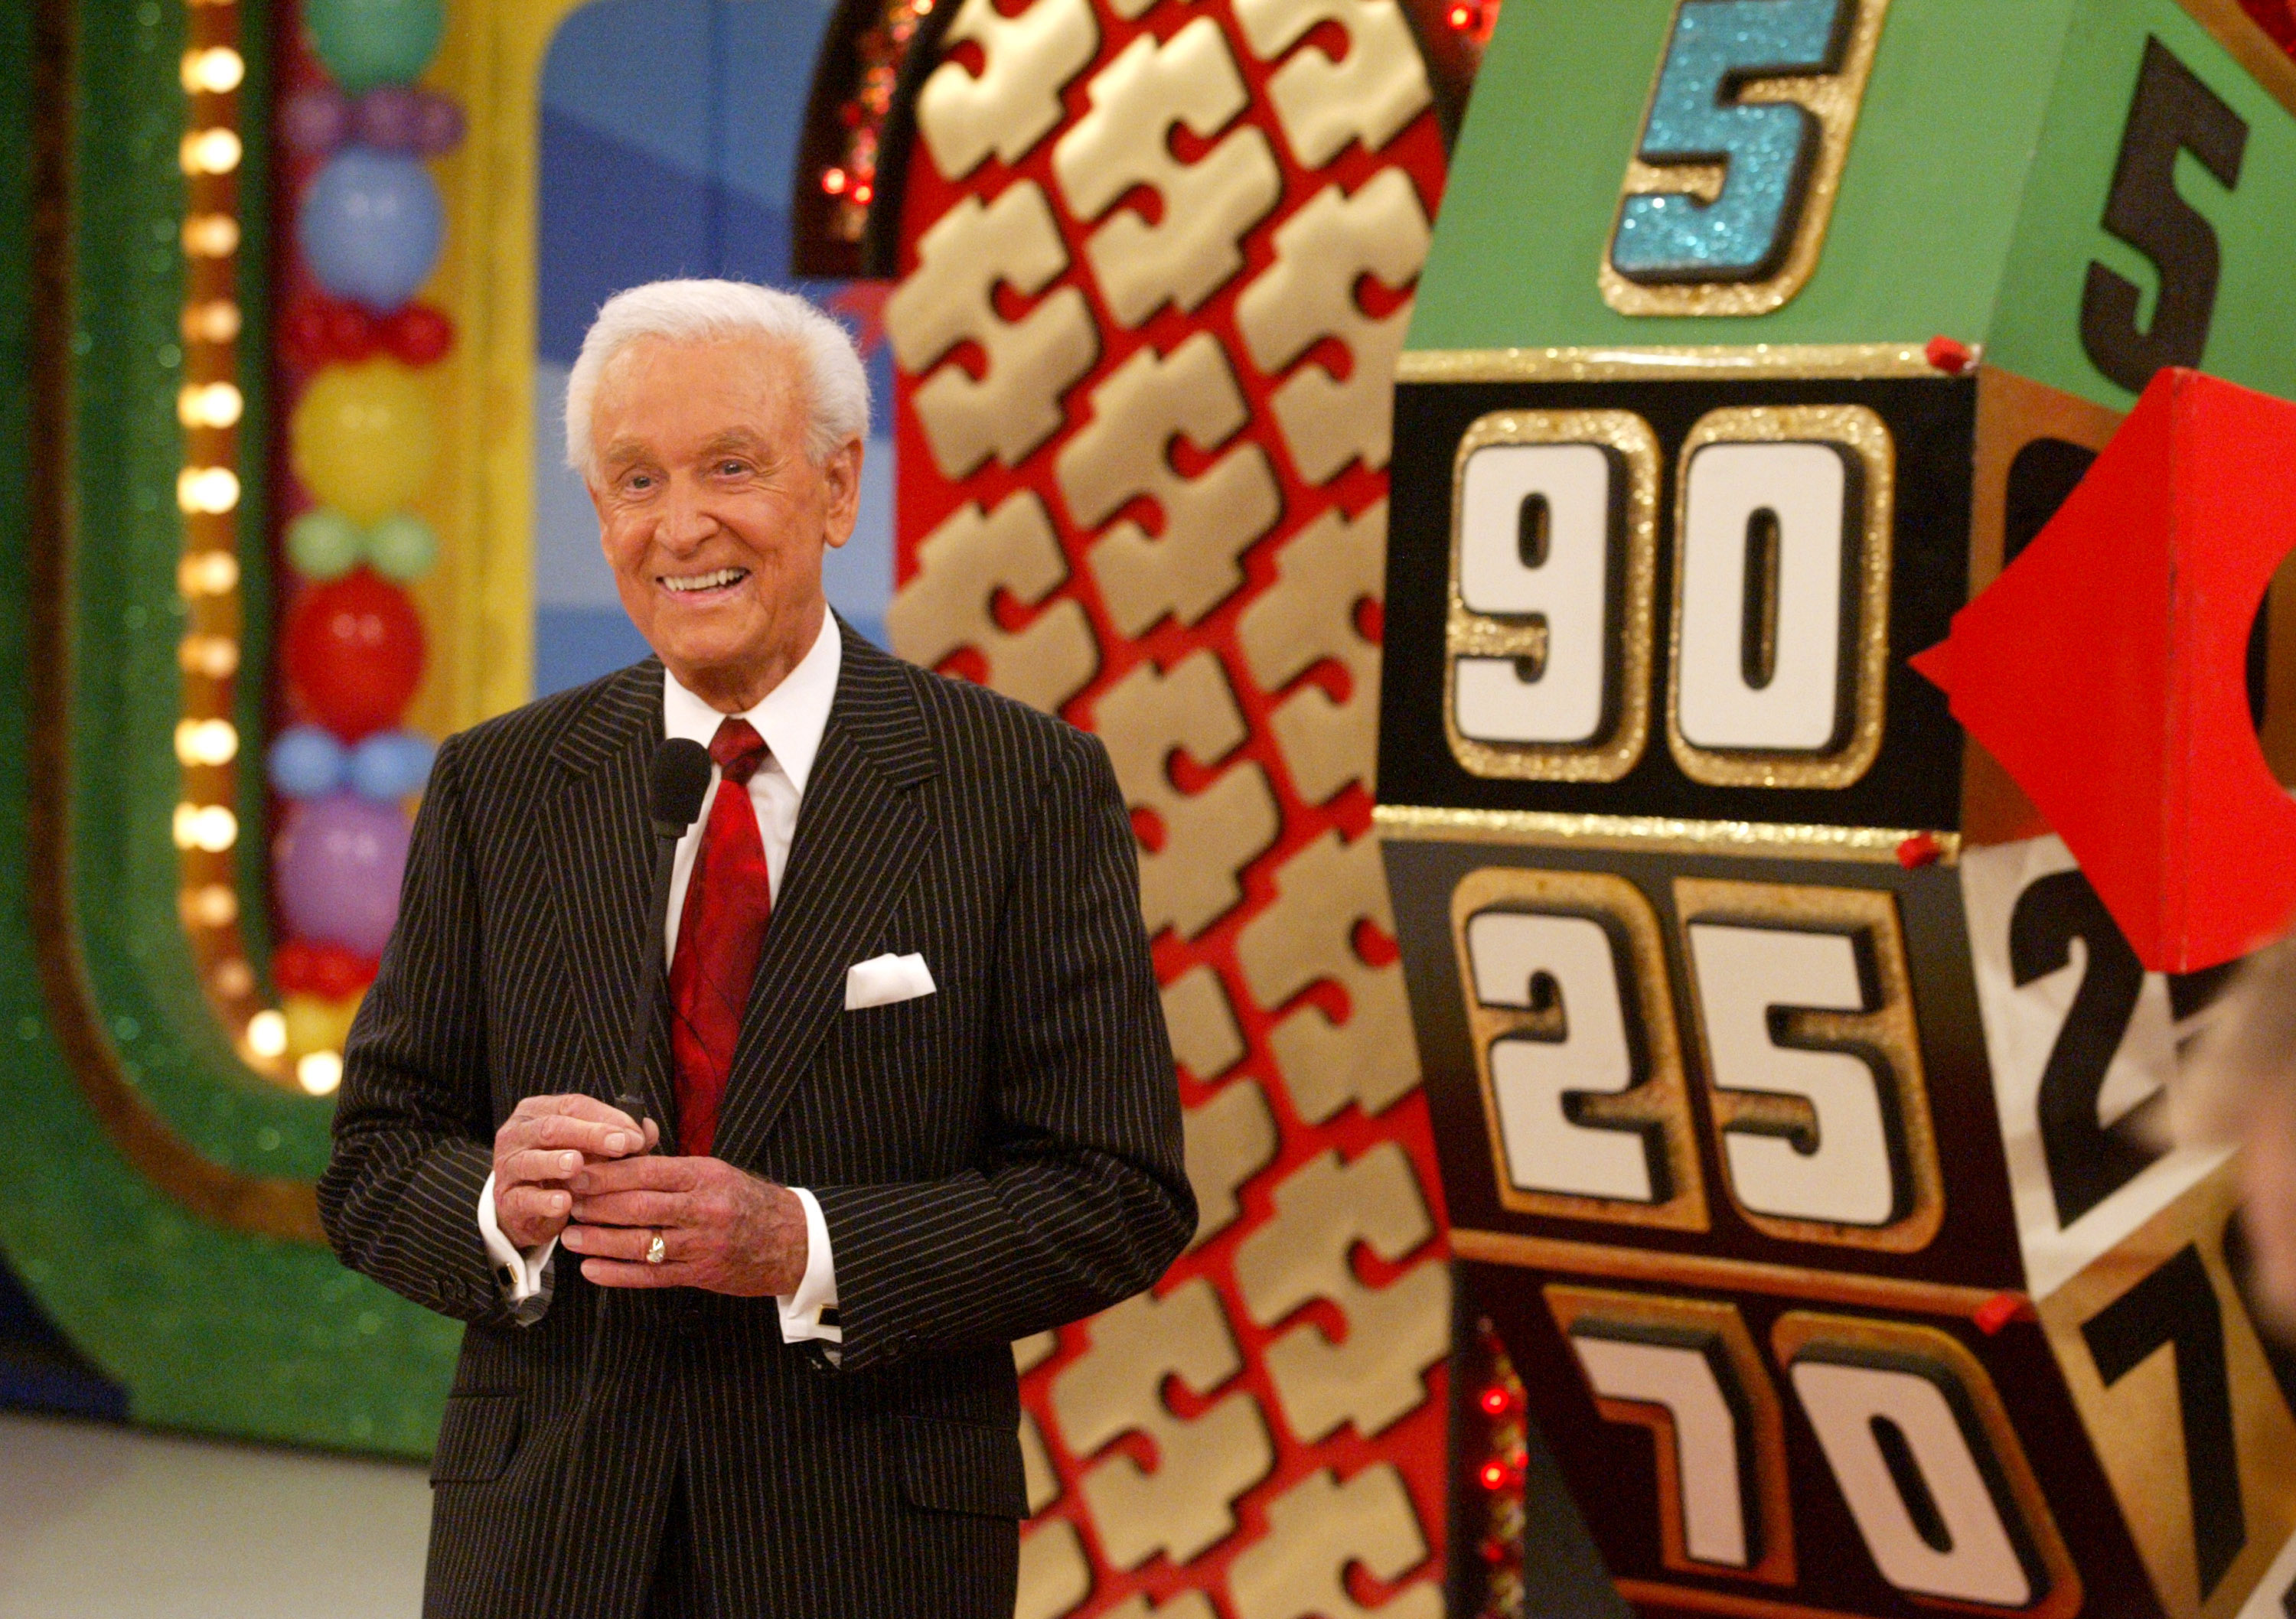 Bob Barker during "The Price is Right" 34th Season Premiere - Taping at CBS Television City in Los Angeles, California, United States circa 2005. | Source: Getty Images